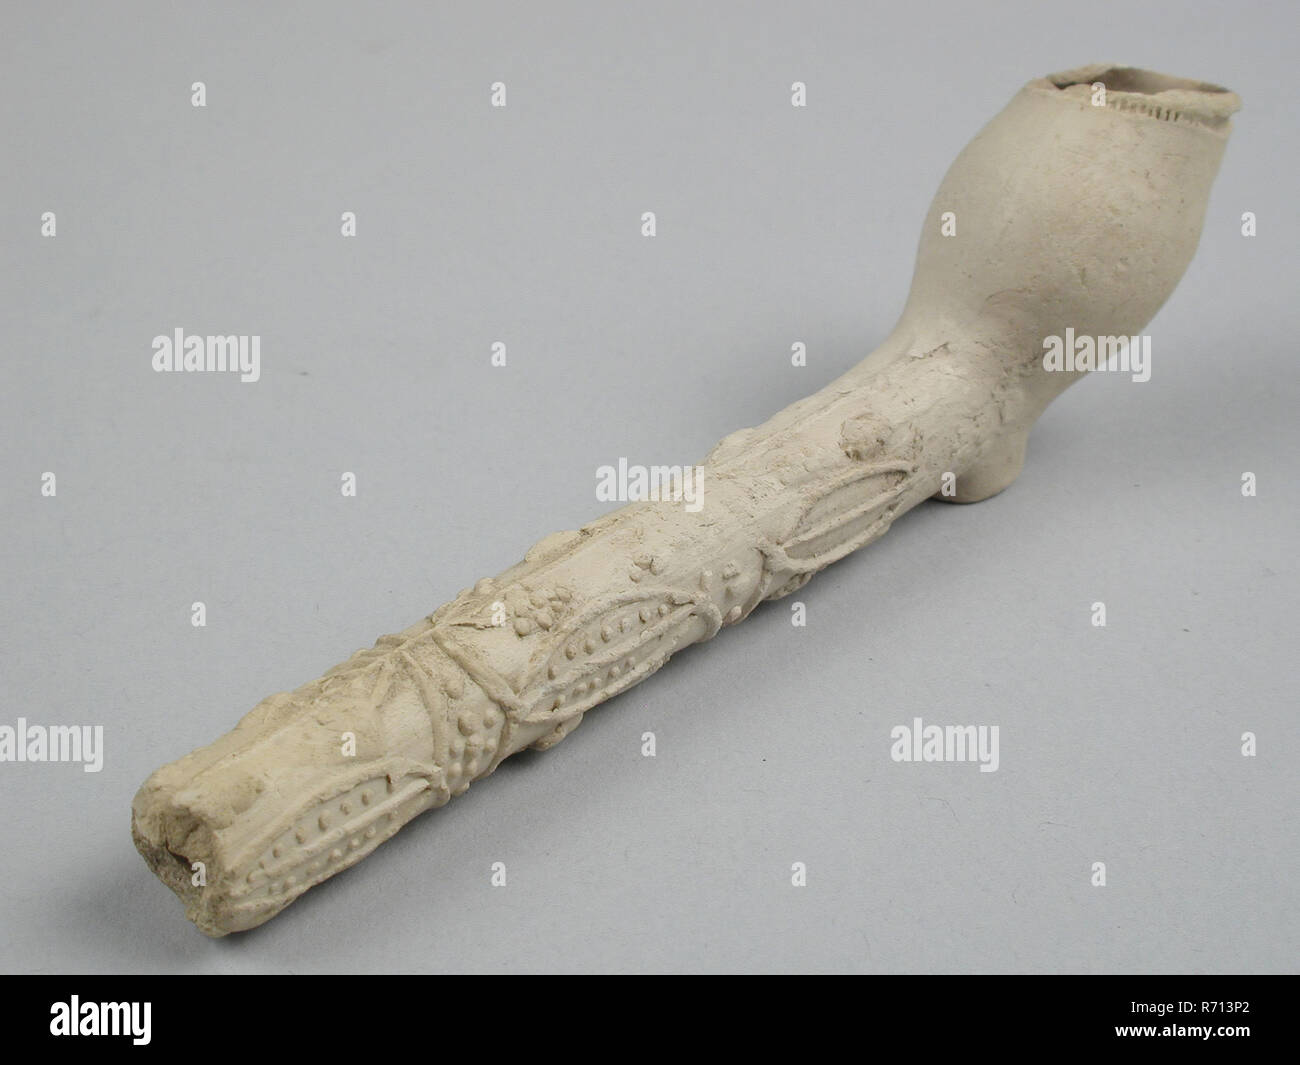 Clay pipe, unnoticed, with floral decoration embossed on stem, clay pipe smoking equipment smoke foundations earthenware, pressed finished baked Clay pipe unnoticed with floral decoration embossed on stem Decoration consists of segments divided by vines into segments with fruit and flower motifs Shrink- or press tear over the heel Baroque pipe archeology indigenous pottery import smoking tobacco baroque Stock Photo